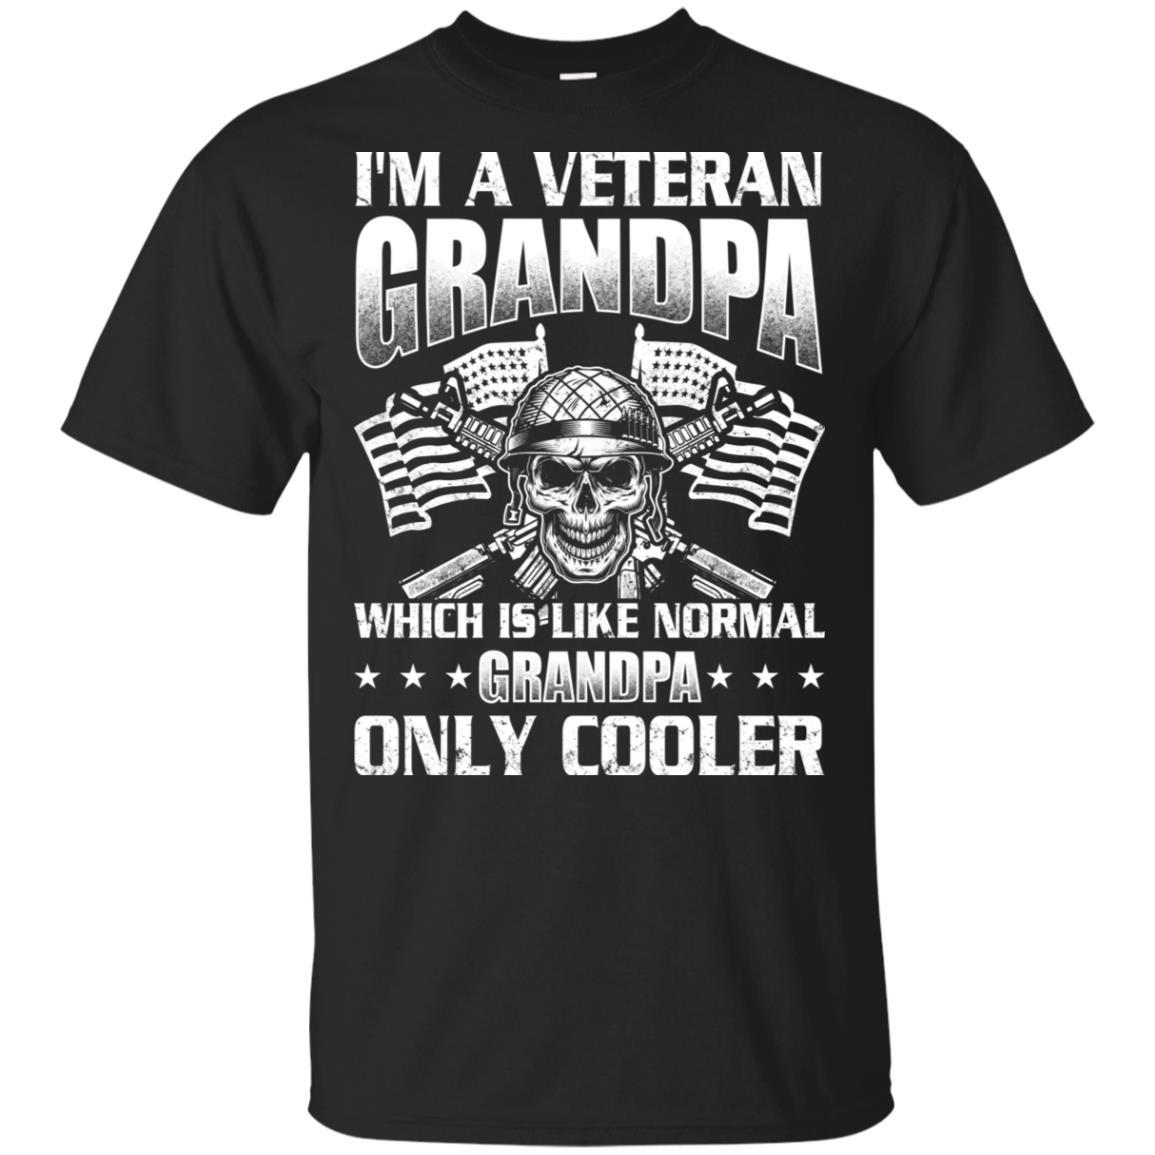 Military T-Shirt "I'm A Veteran Grandpa Which Is Like Normal Grandpa Only Cooler On" Front-TShirt-General-Veterans Nation